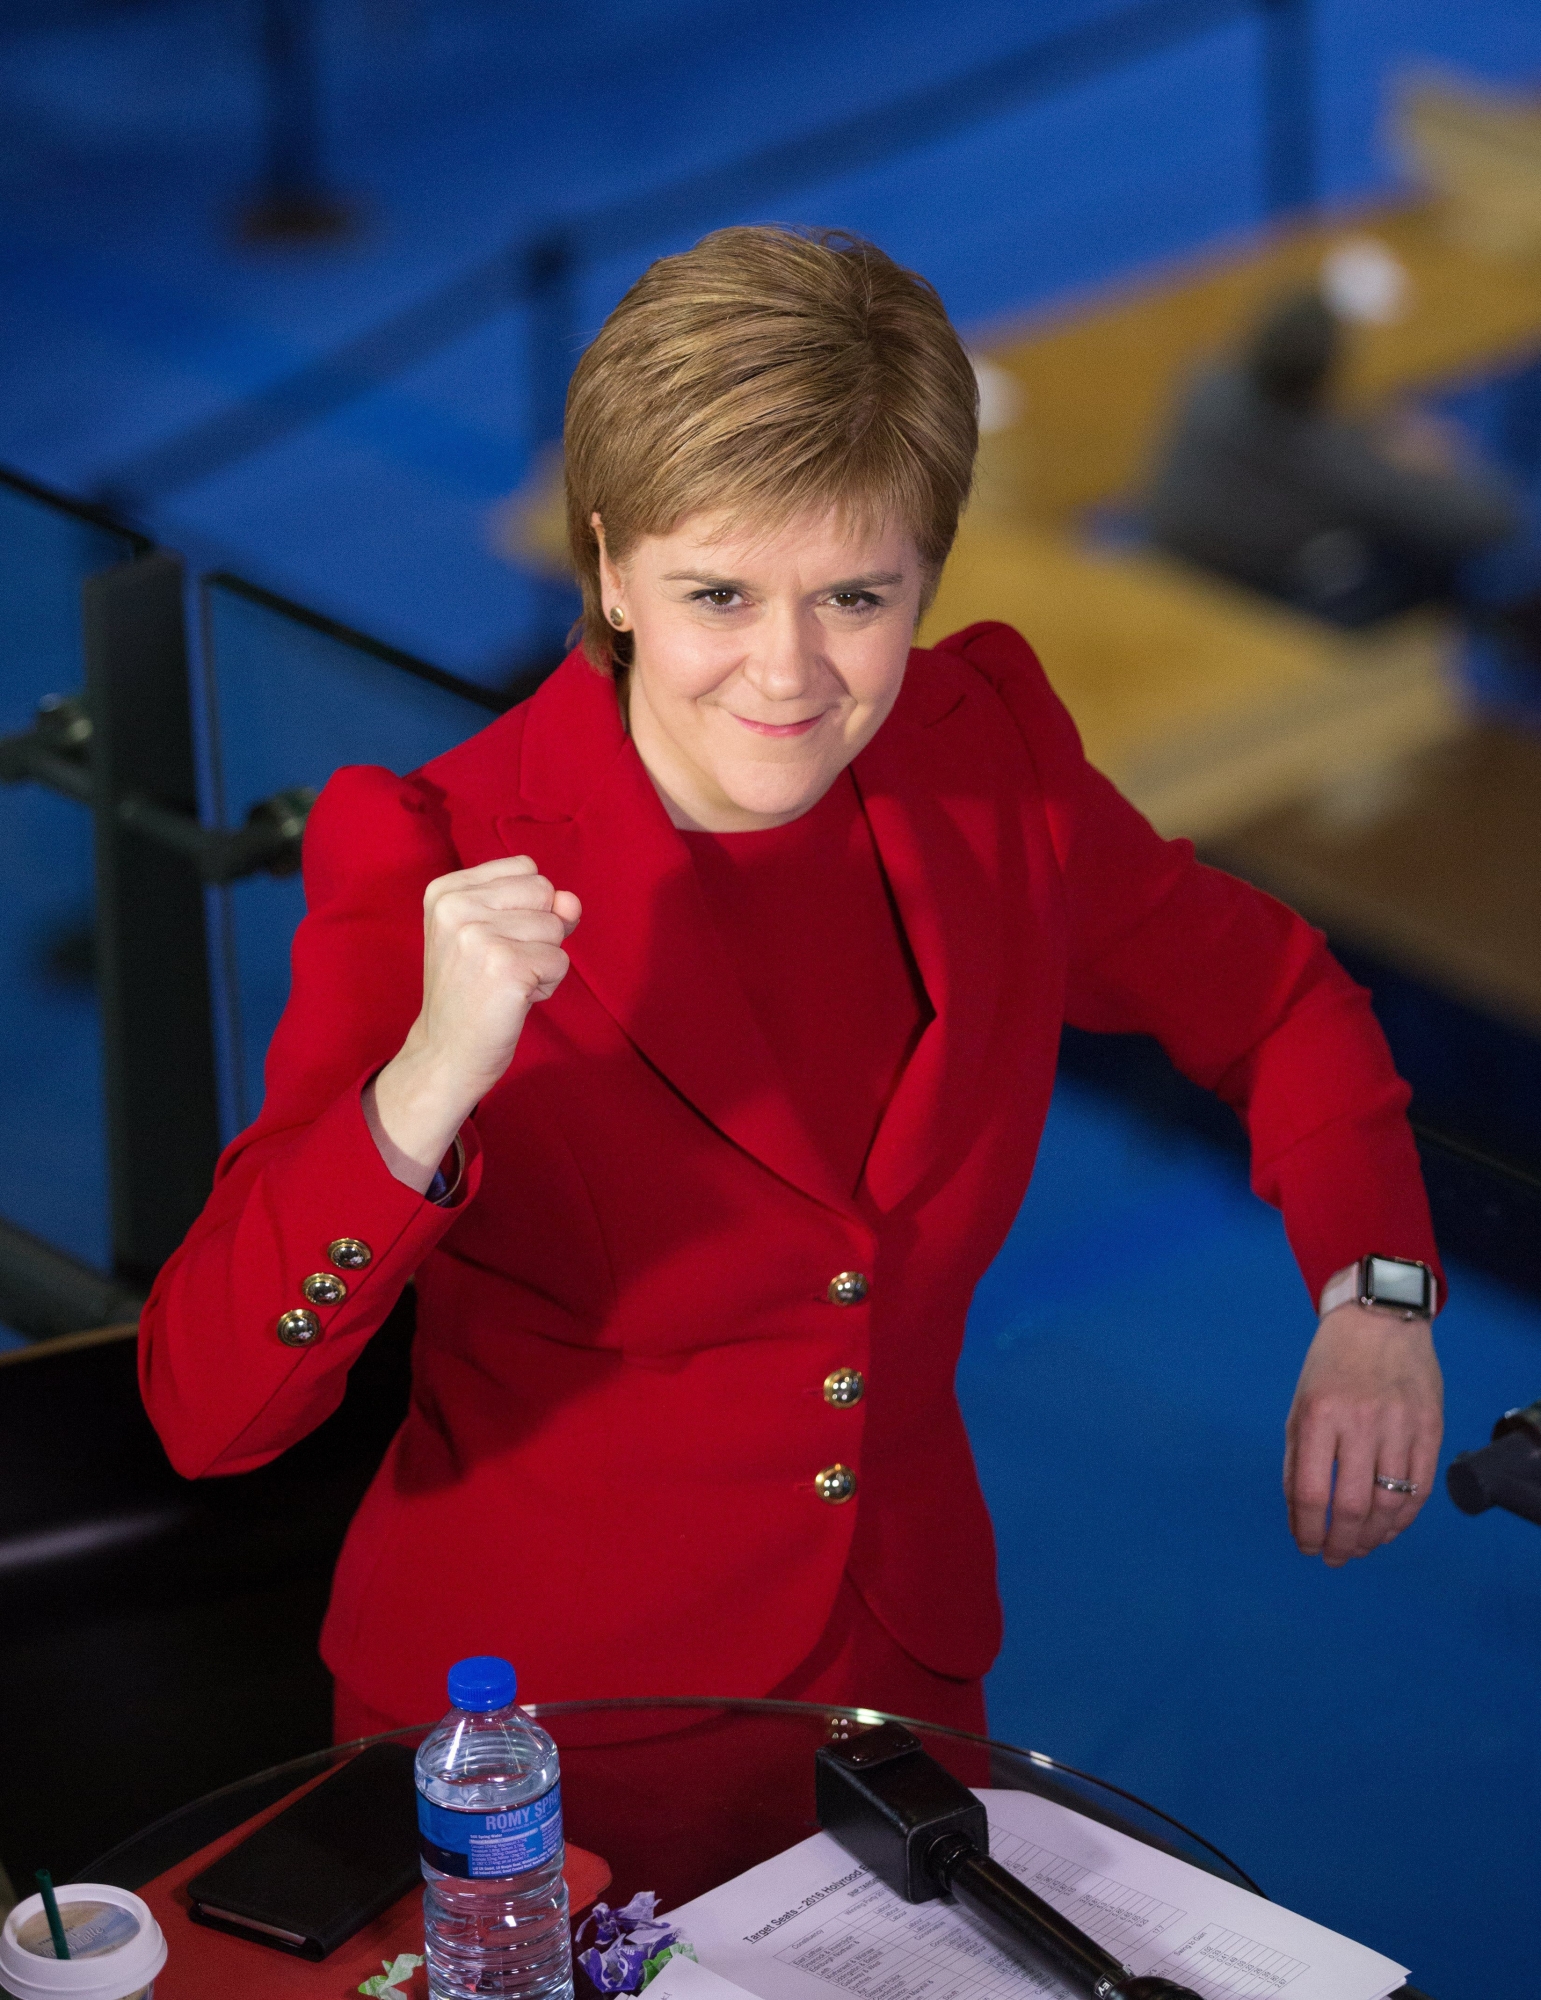 epa05845673 (FILE) - A file photograph showing leader of the Scottish National Party (SNP), Nicola Sturgeon reacts at the Emirates Arena in Glasgow, Scotland, Britain, 06 May 2016. Media reports on 13 March 2017 state that Nicola Sturgeon will seek approval for second Scottish Independence referendum.  EPA/ROBERT PERRY (FILE) BRITAIN SCOTLAND SECOND REFERENDUM